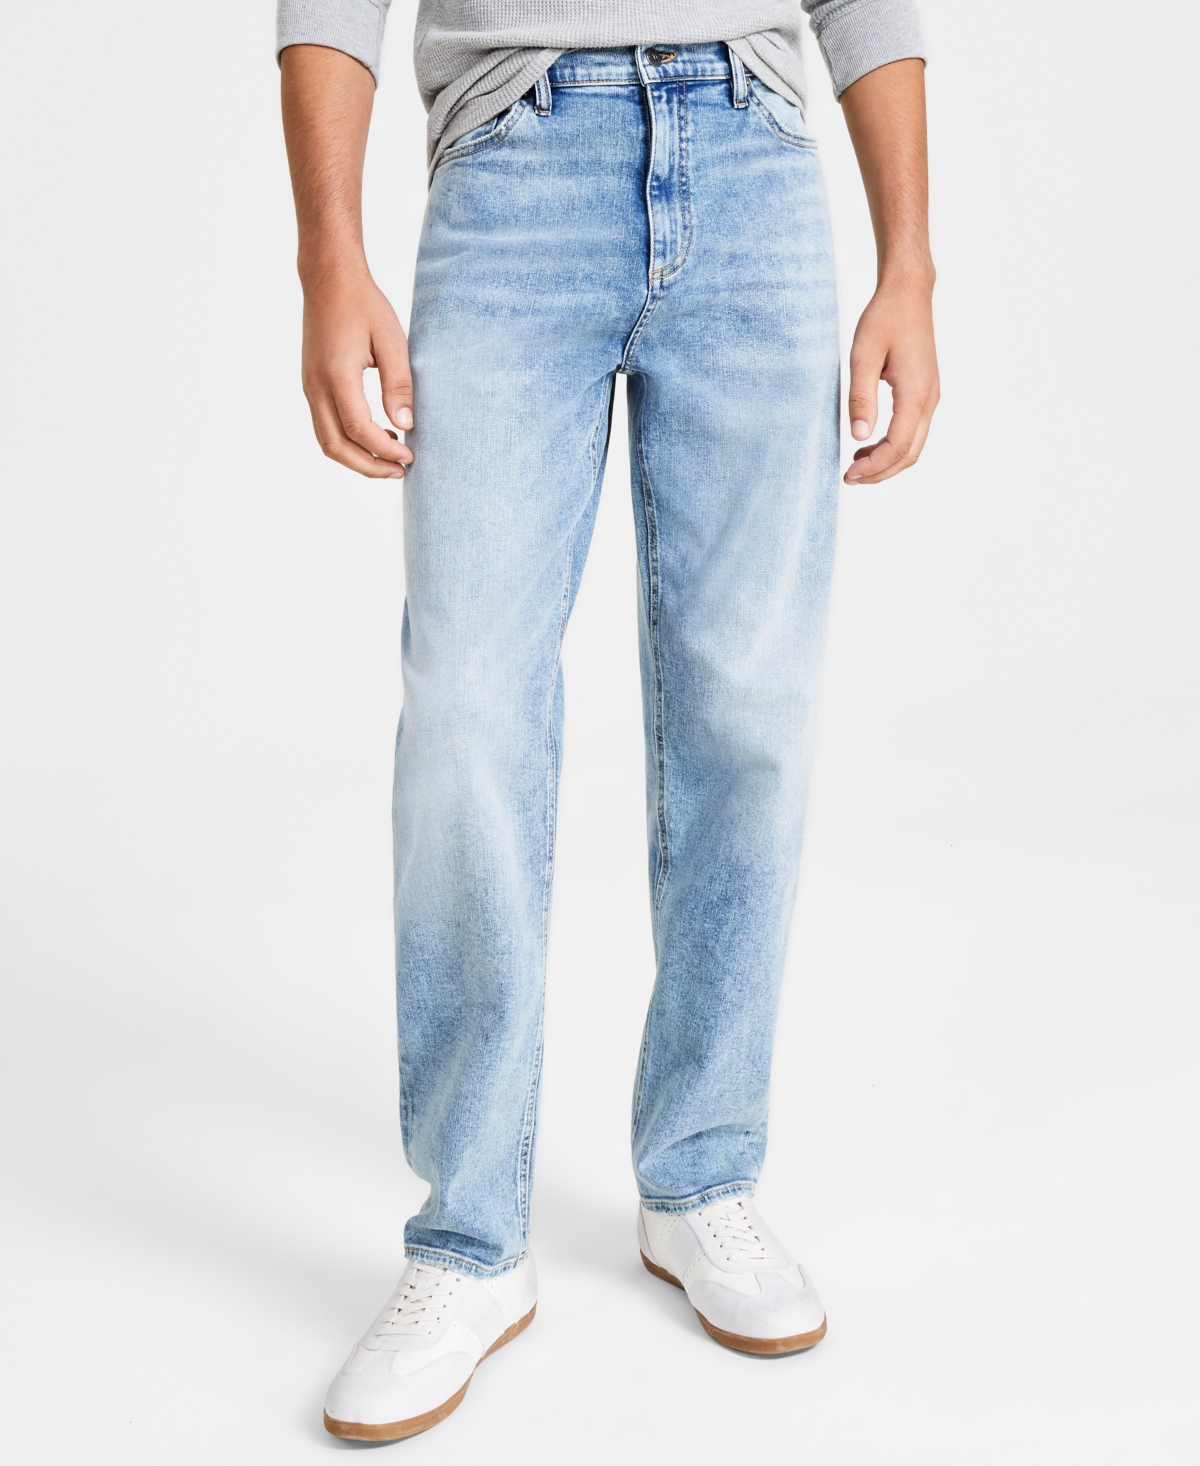 Men's Stacy Loose-Fit Comfort Stretch Jeans, Created for Macy's - Venice Wash